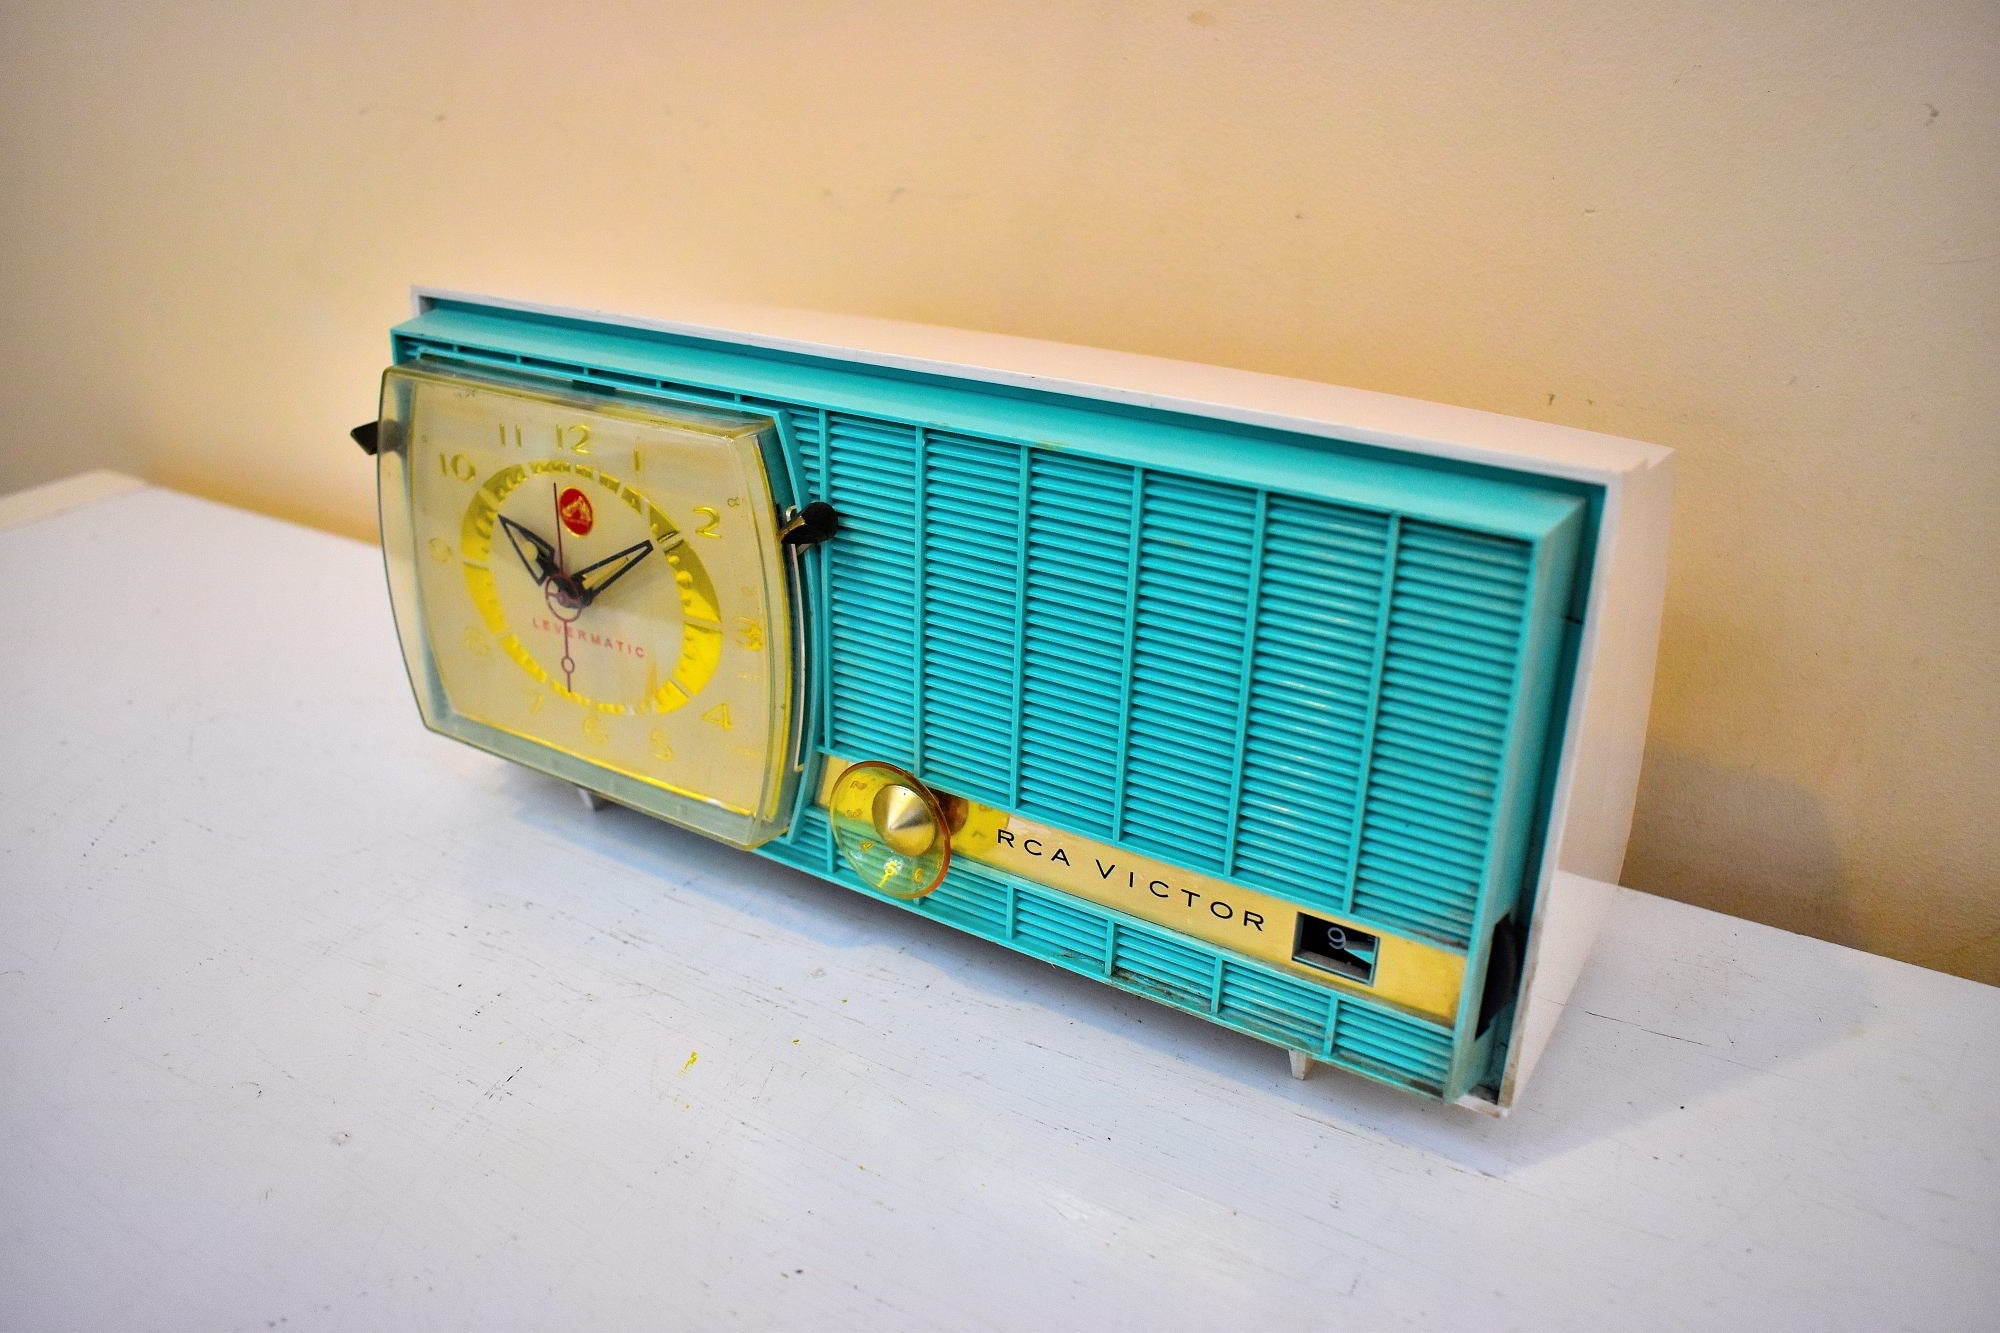 Bluetooth Ready To Go - Turquoise and White 1957 RCA Victor Model C-3HE AM Vacuum Tube Radio Sounds Great!